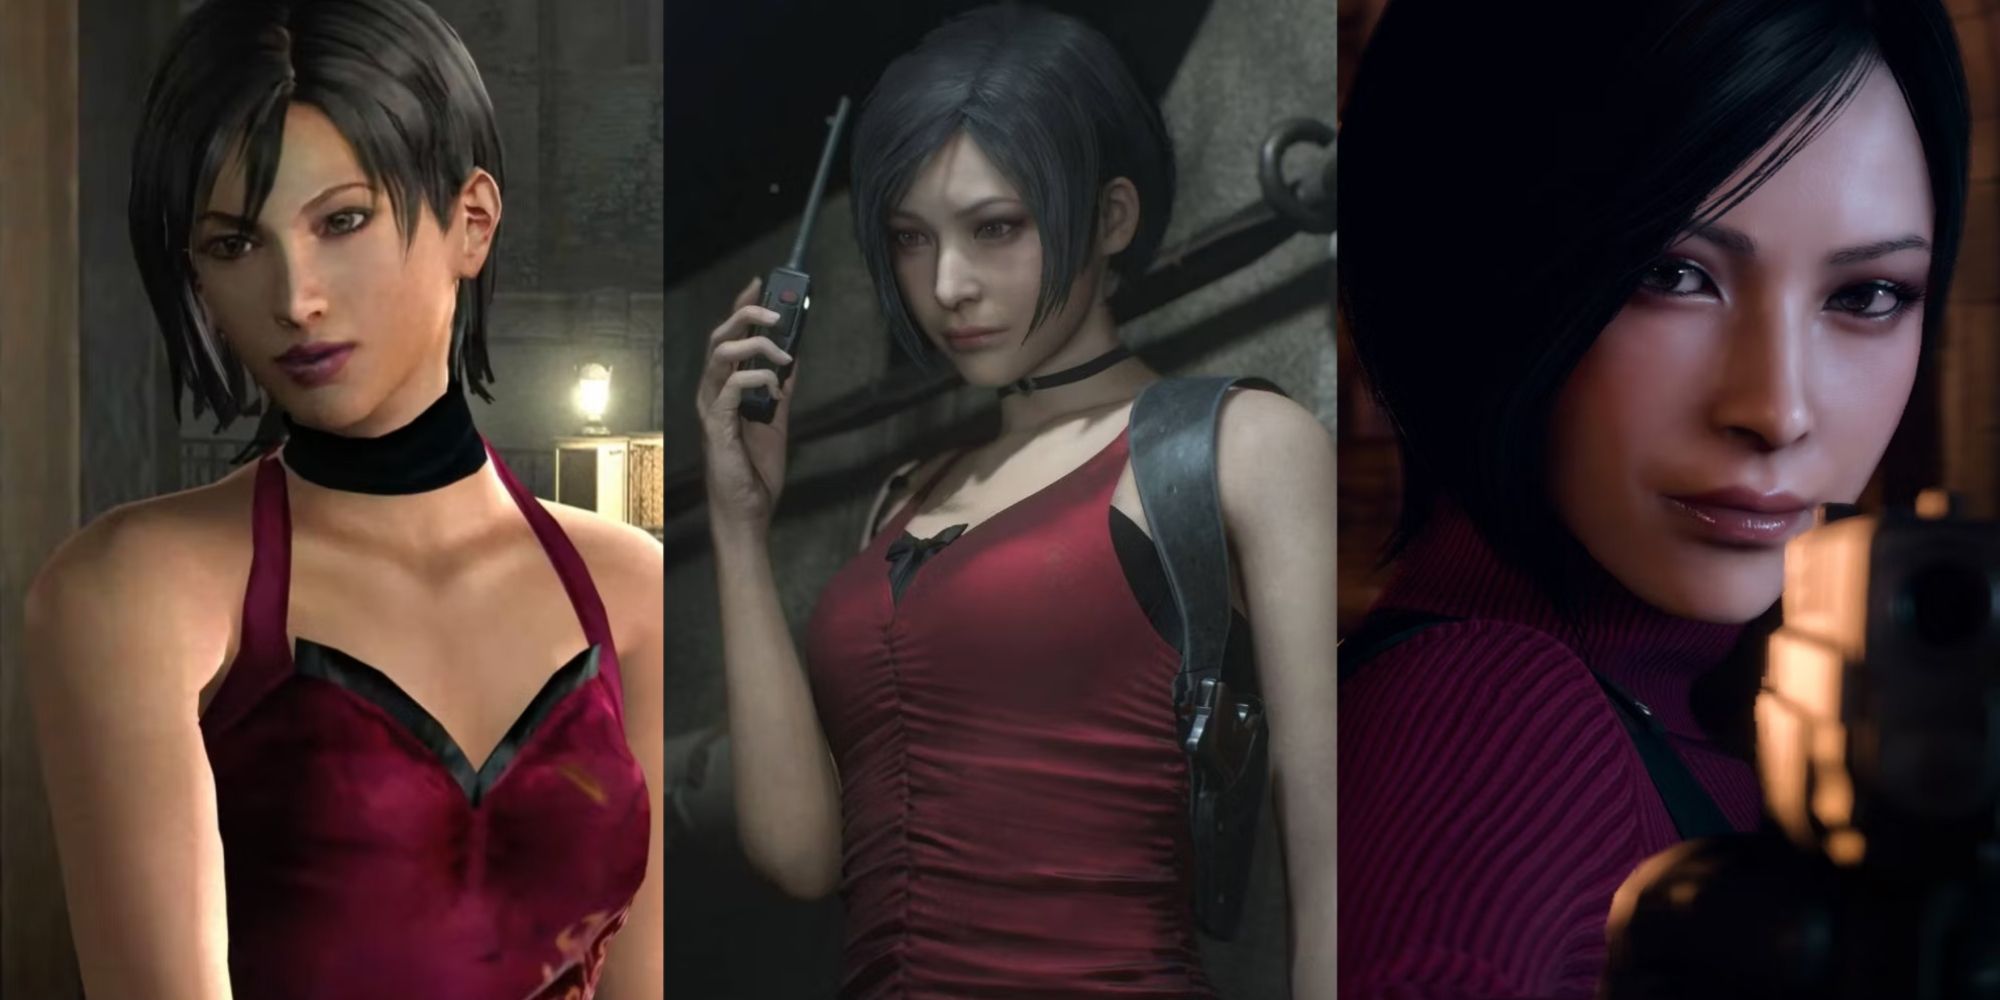 Ada Wong Appearances Featured Split Images Featuring RE4 Ada, RE2 Remake Ada, and RE4 Remake Ada